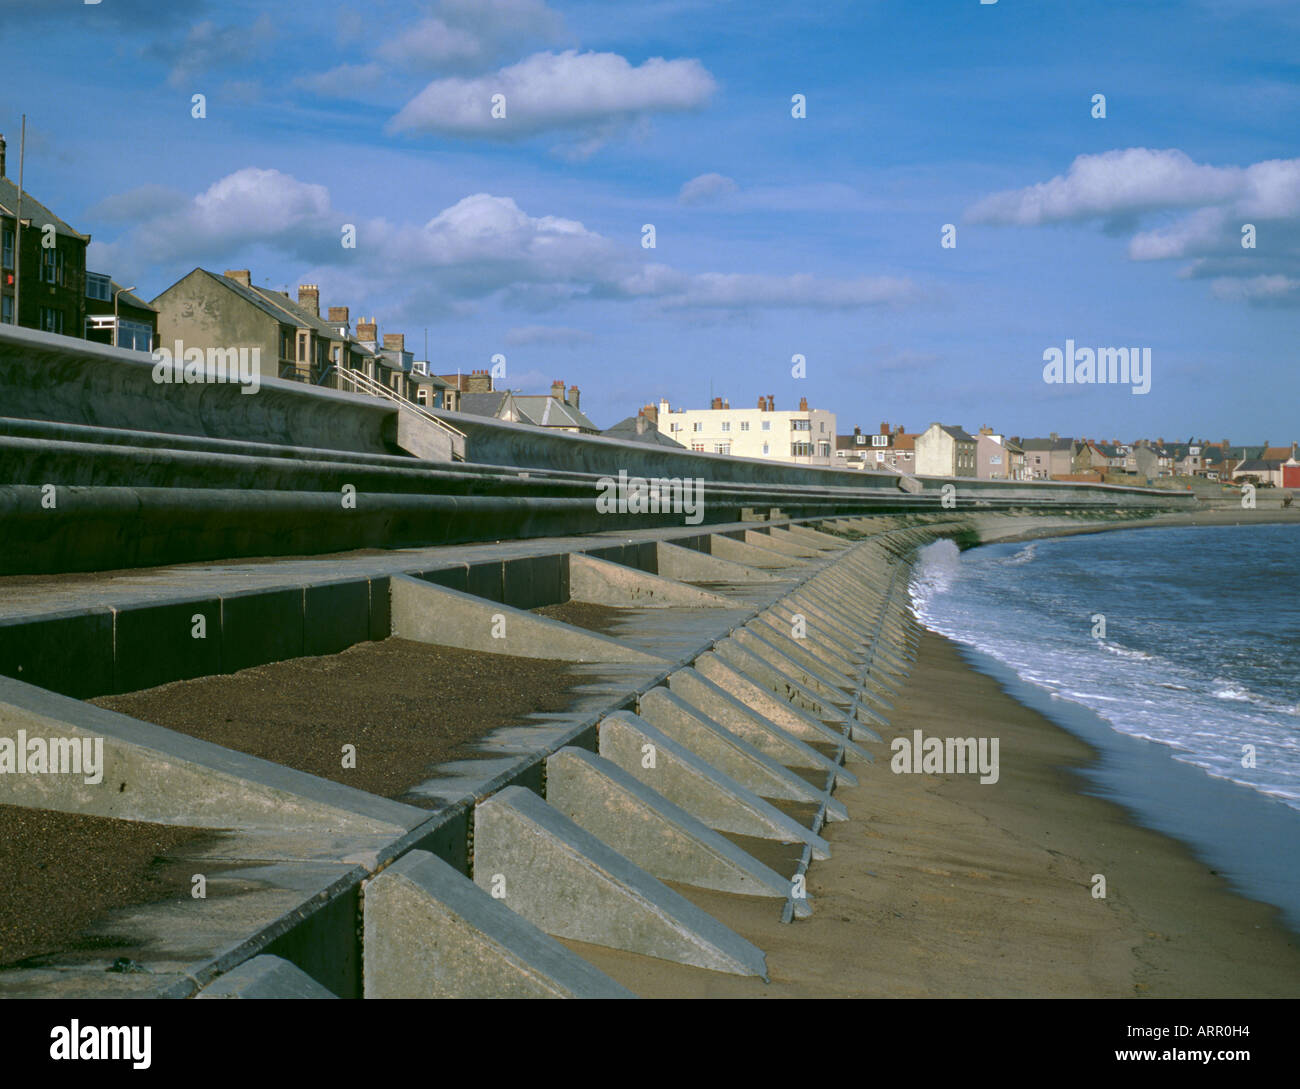 Coastal protection; reinforced concrete stepped berms and wave wall, Newbiggin-by-the-Sea, Northumberland, England, UK. Stock Photo